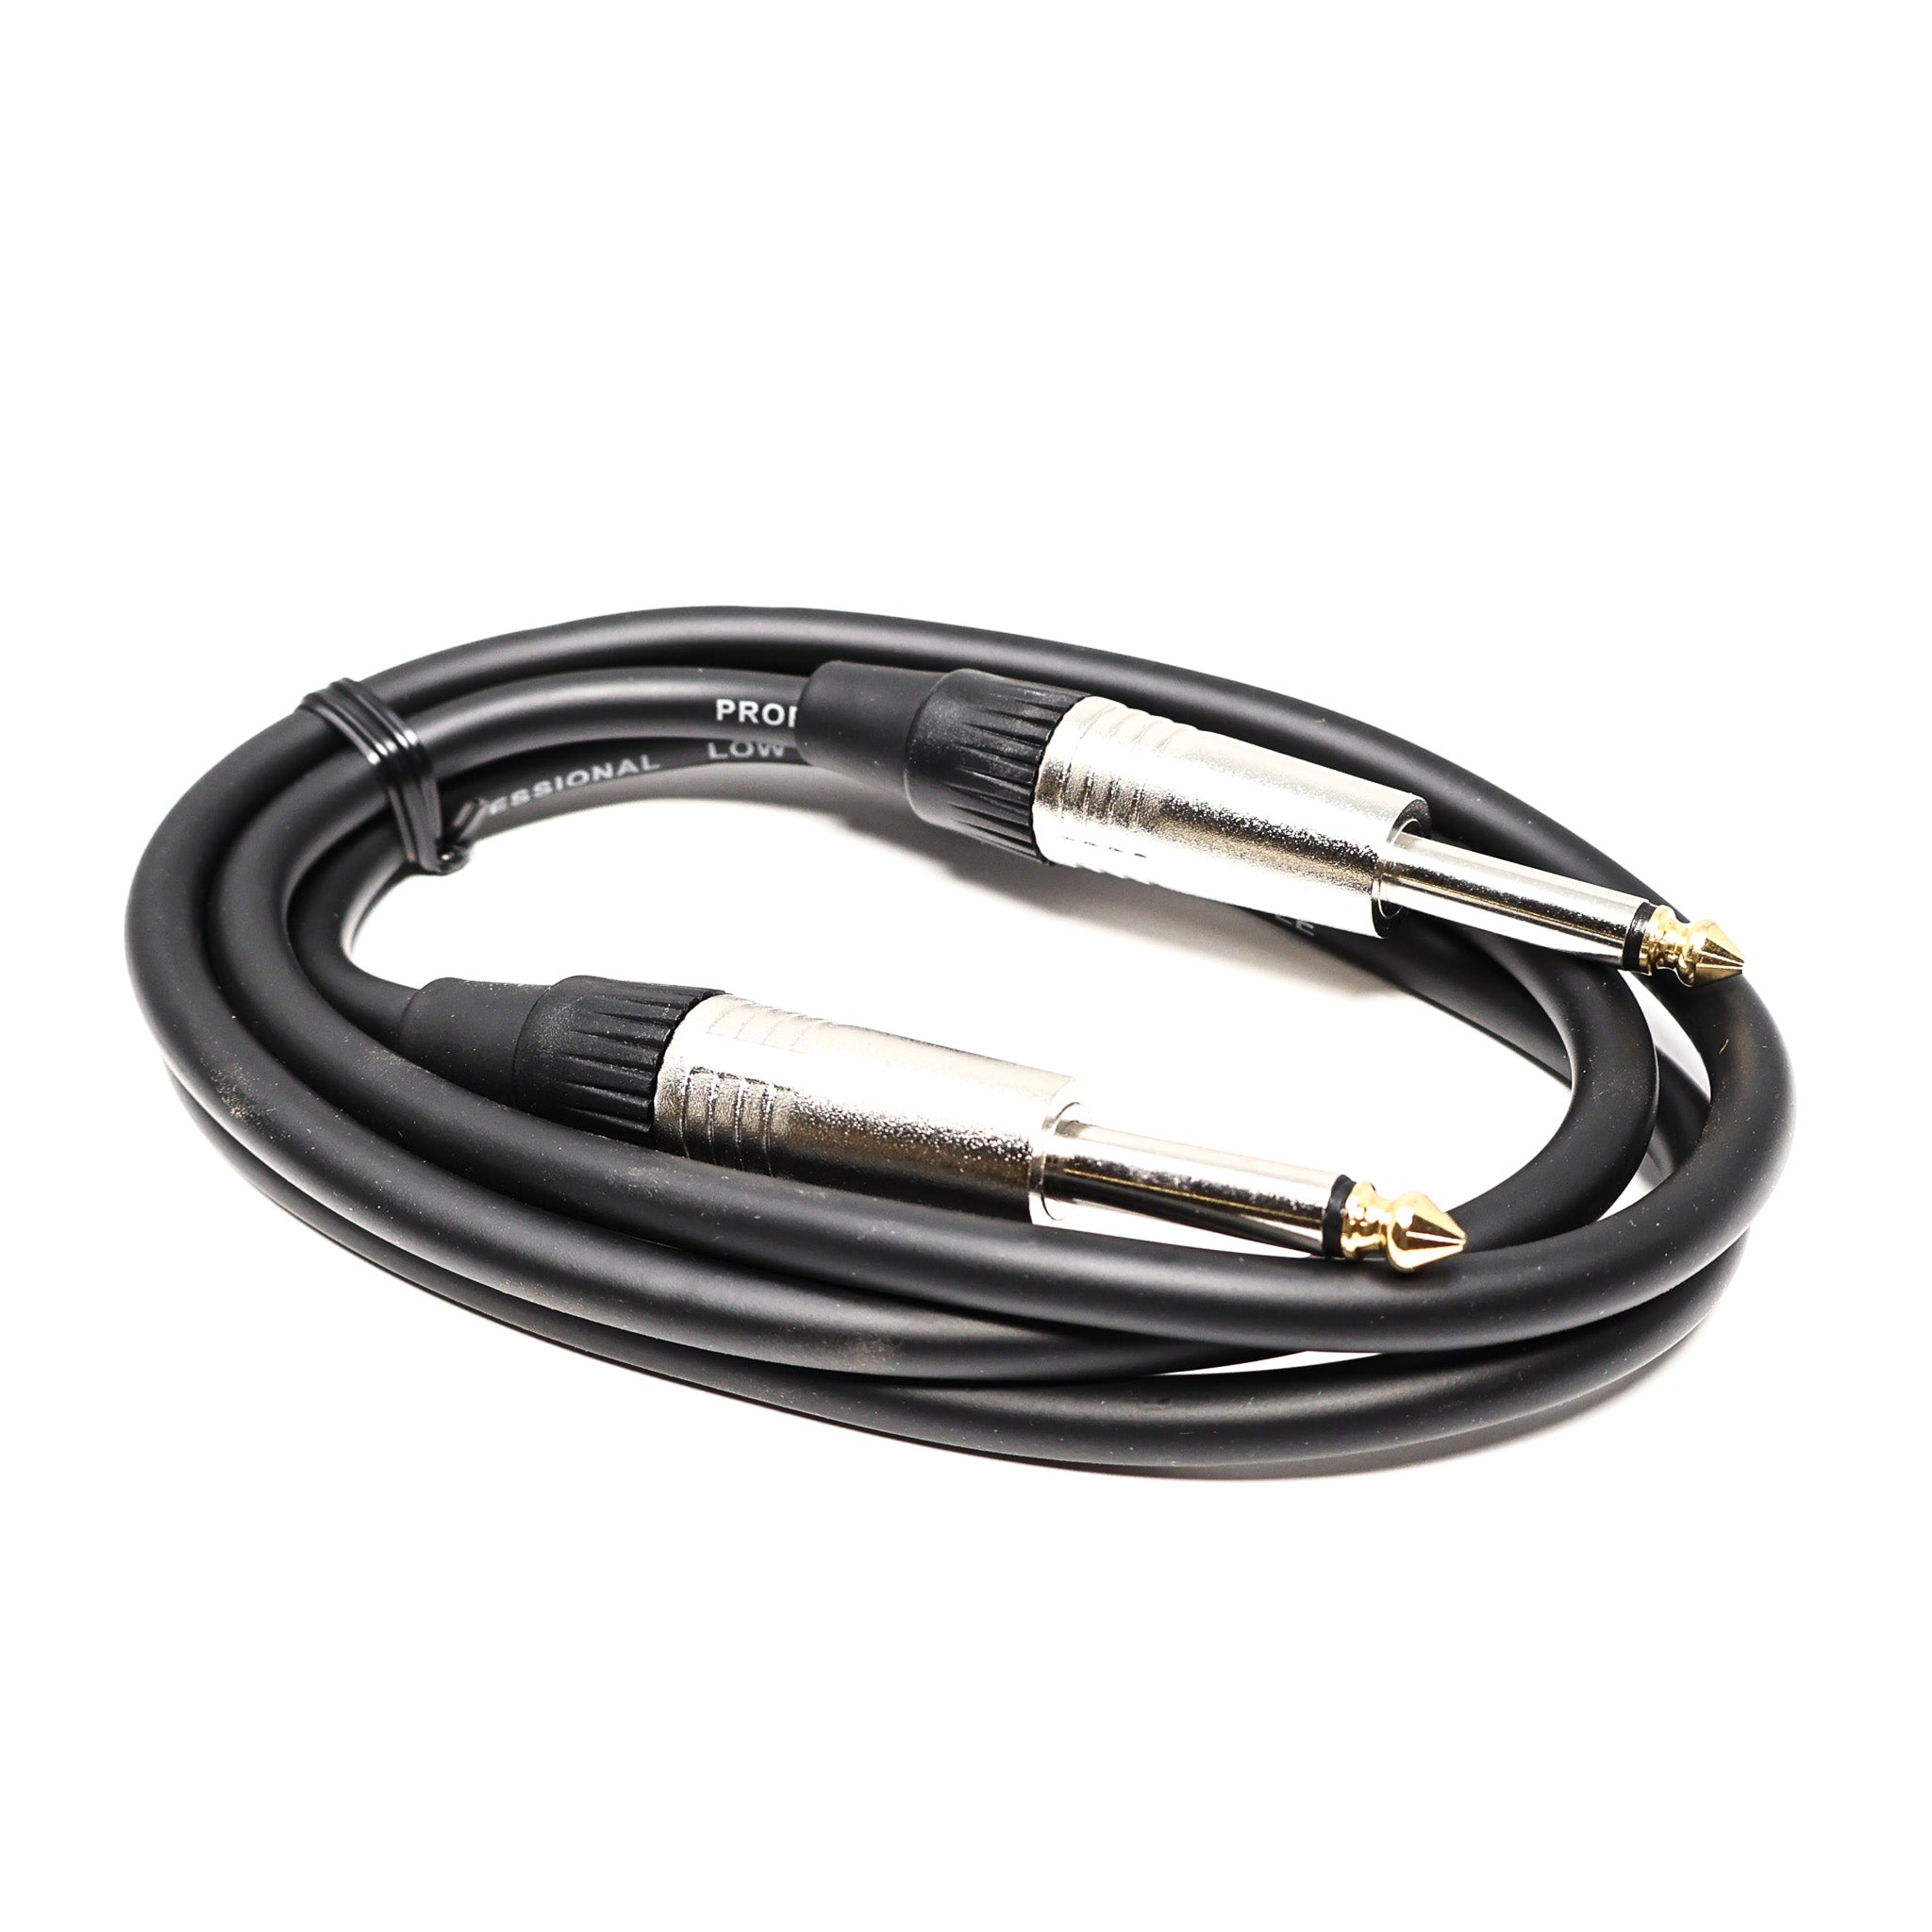 Professional Speaker Cable With Two Standard Male Jacks - 4 Feet